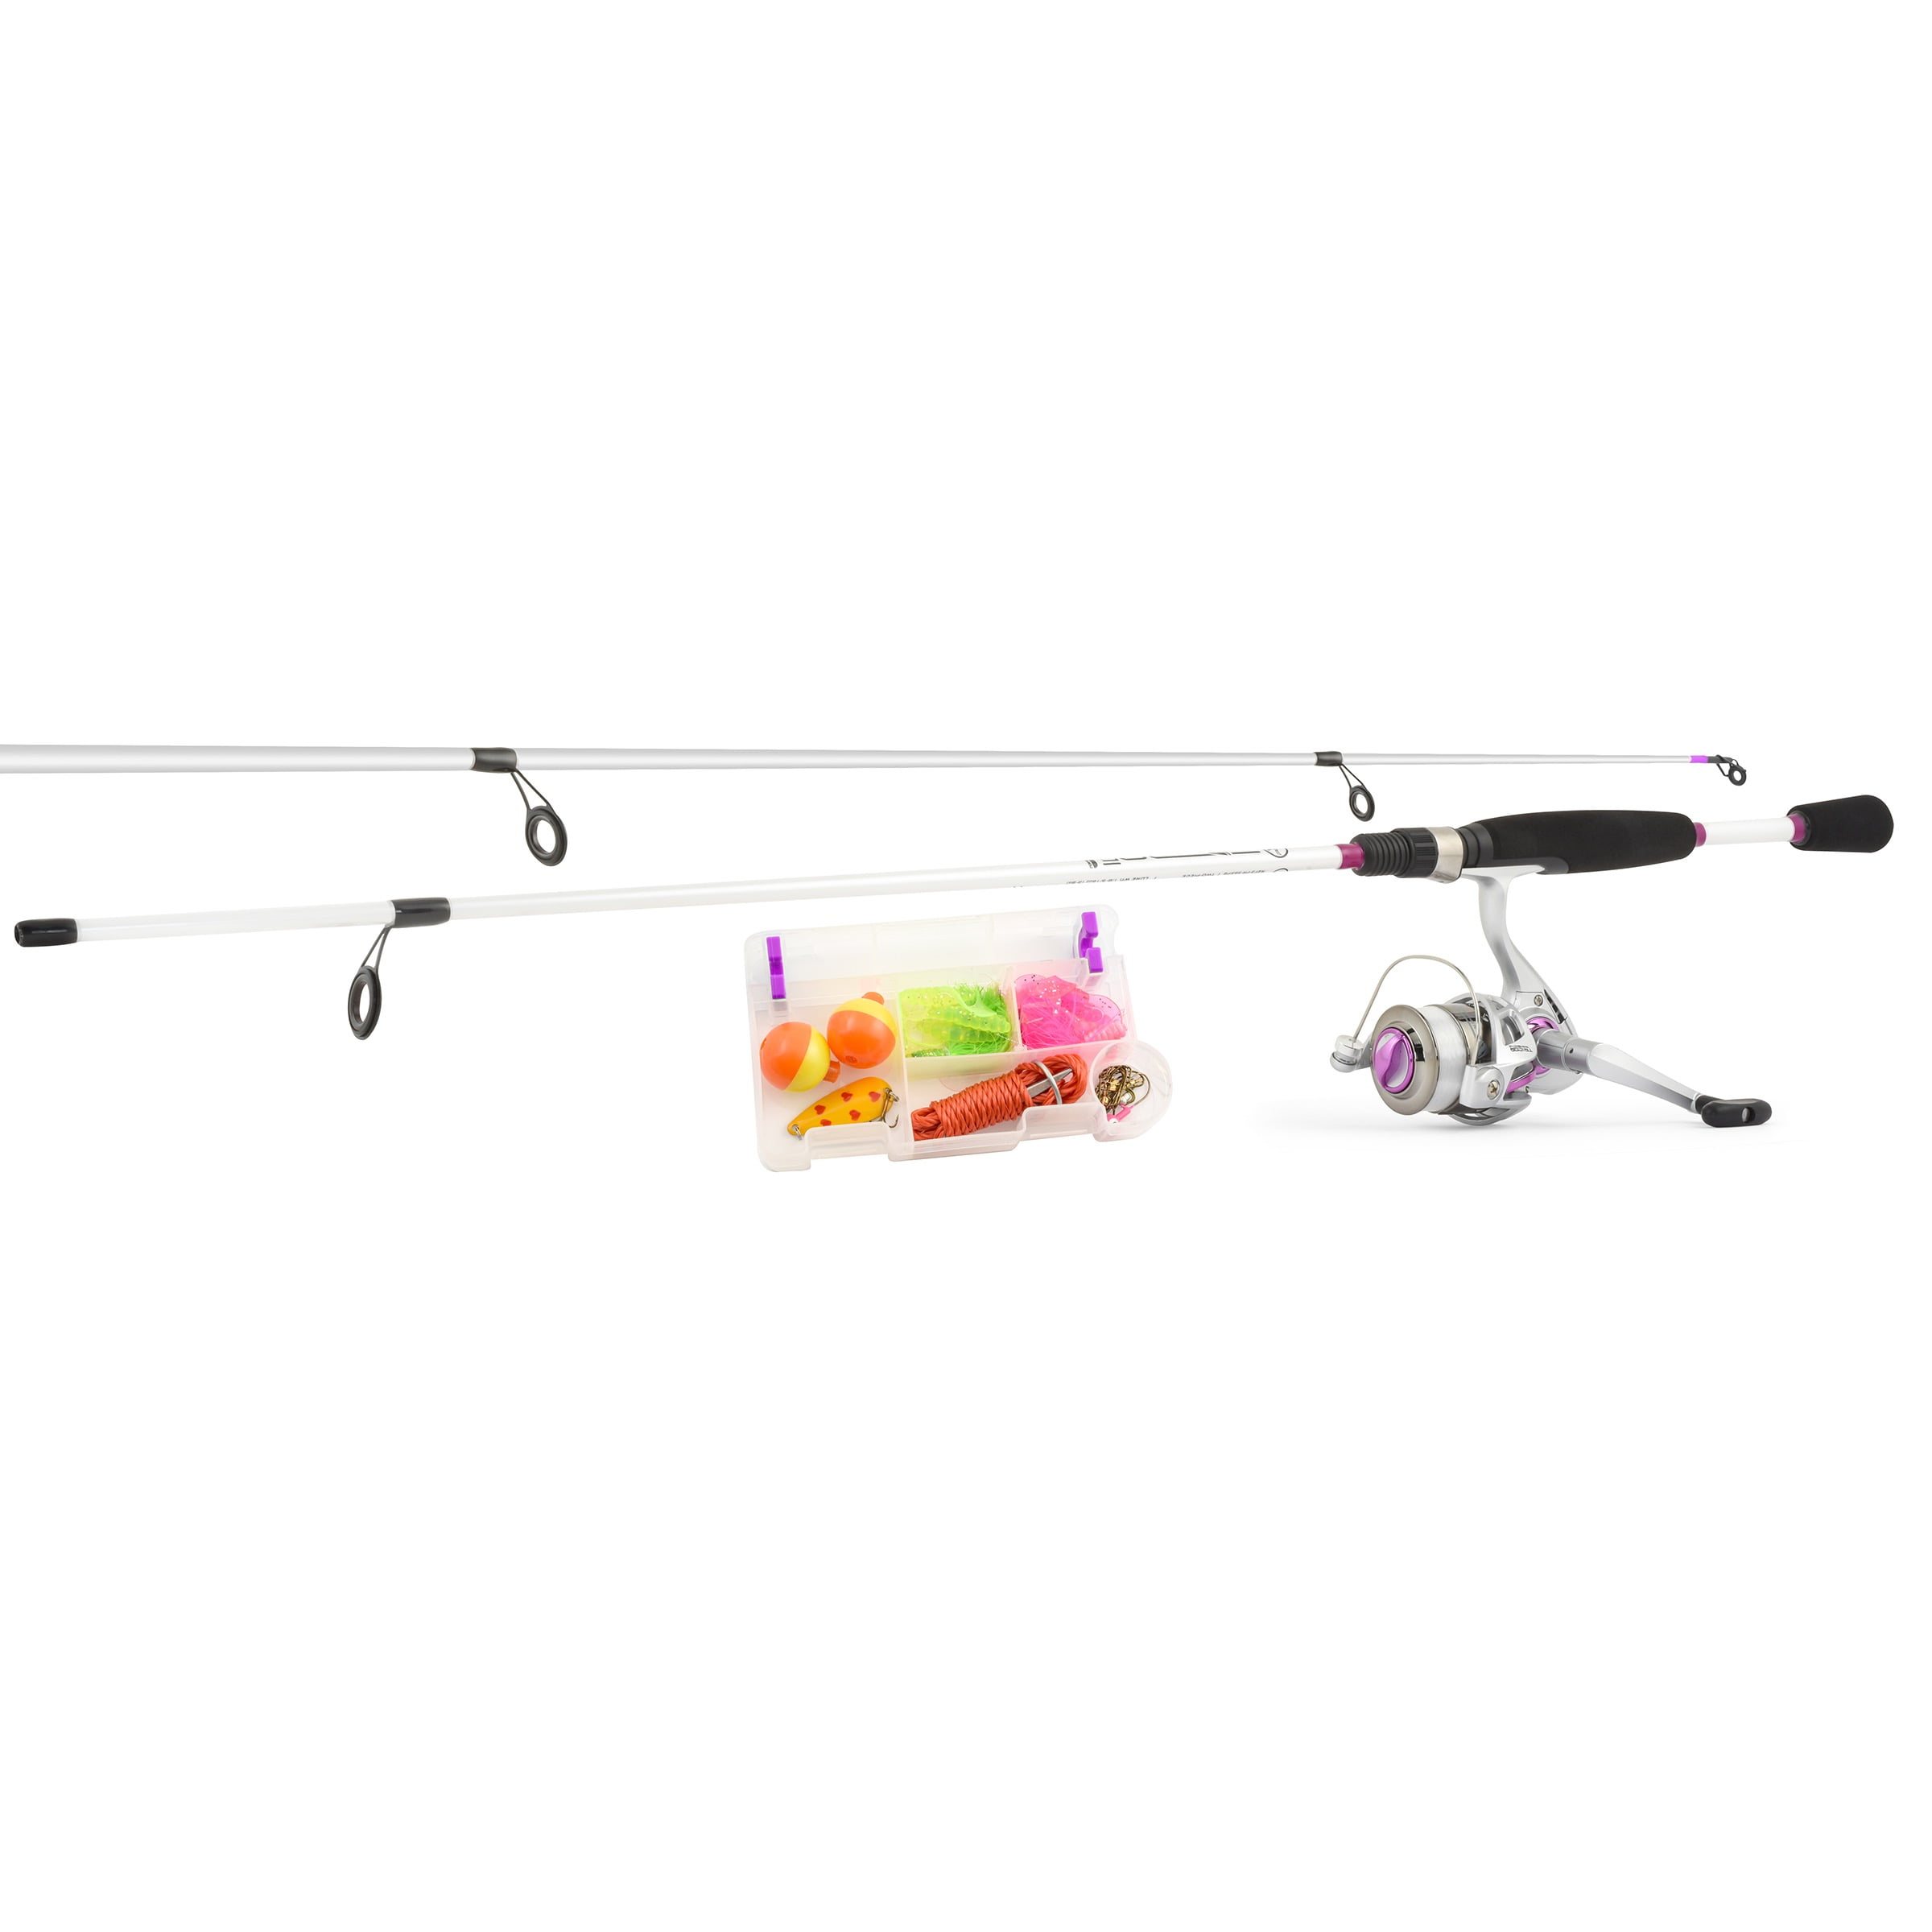 South Bend R2F Purple Spinning Fishing Rod Reel Combo w/ Tackle Kit, 5' 6